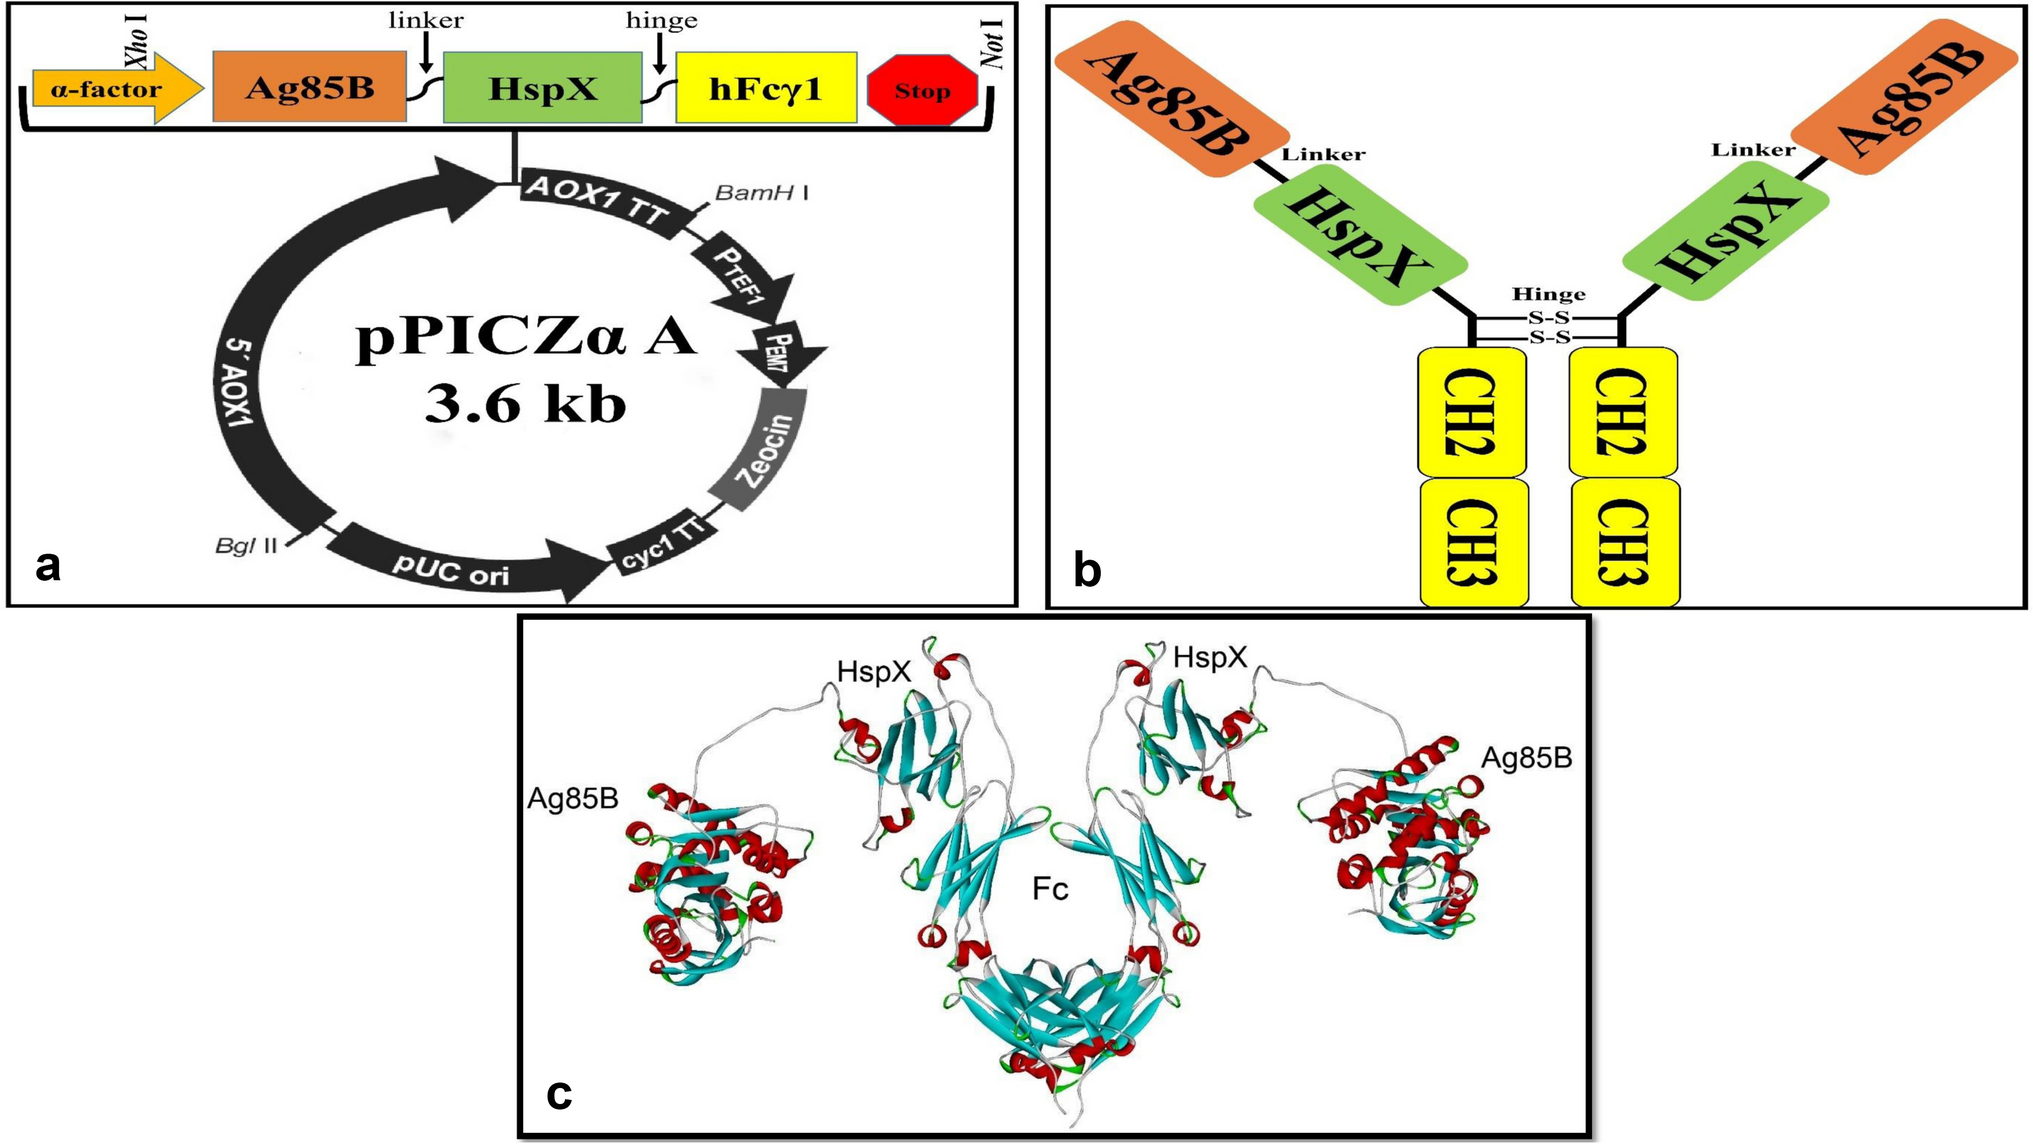 Production and Evaluation of Ag85B:HspX:hFcγ1 Immunogenicity as an Fc Fusion Recombinant Multi-Stage Vaccine Candidate Against Mycobacterium tuberculosis